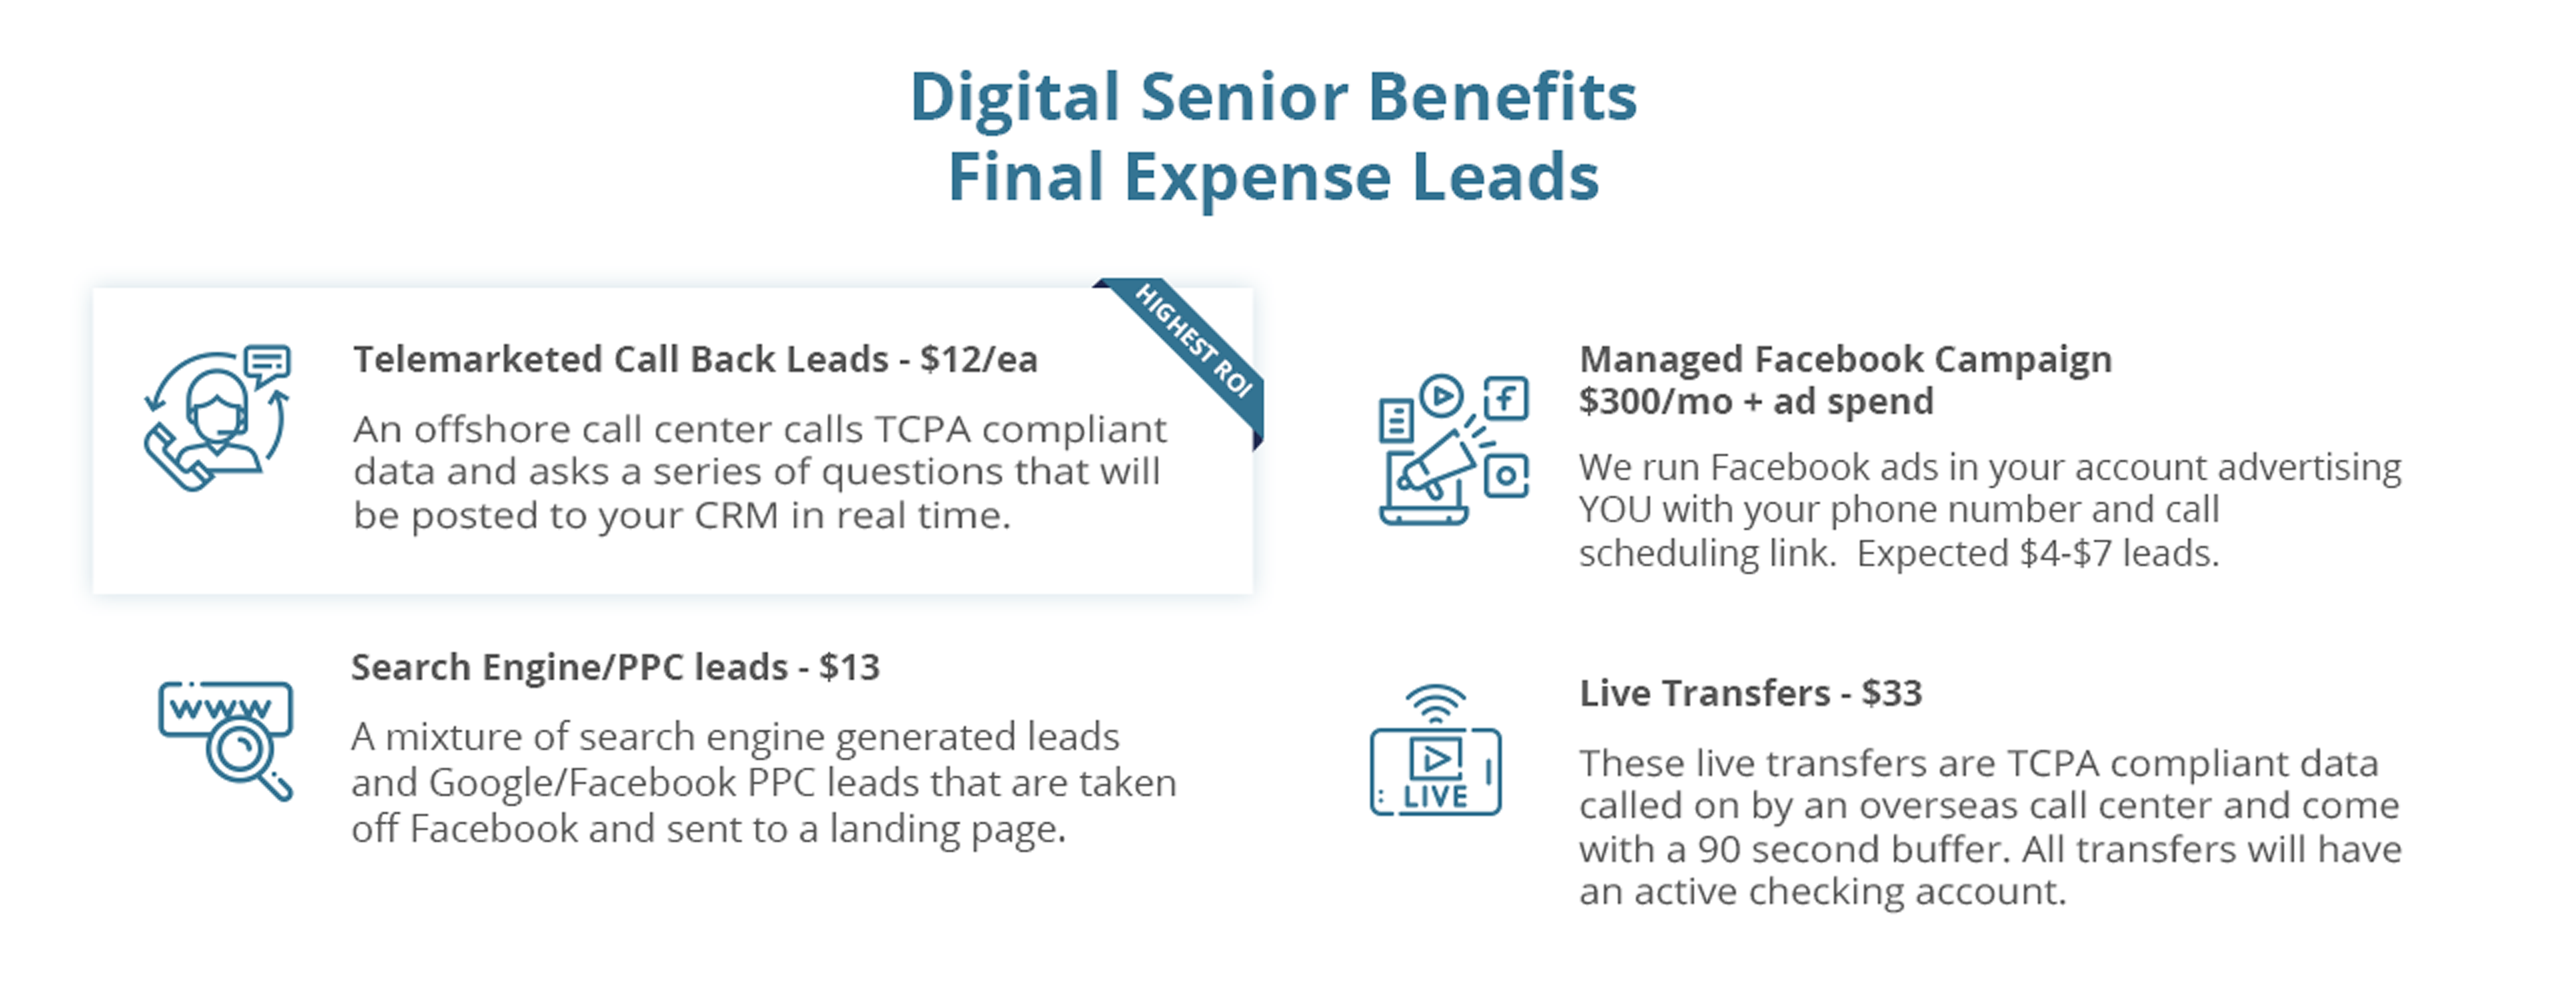 Best Final Expense Leads